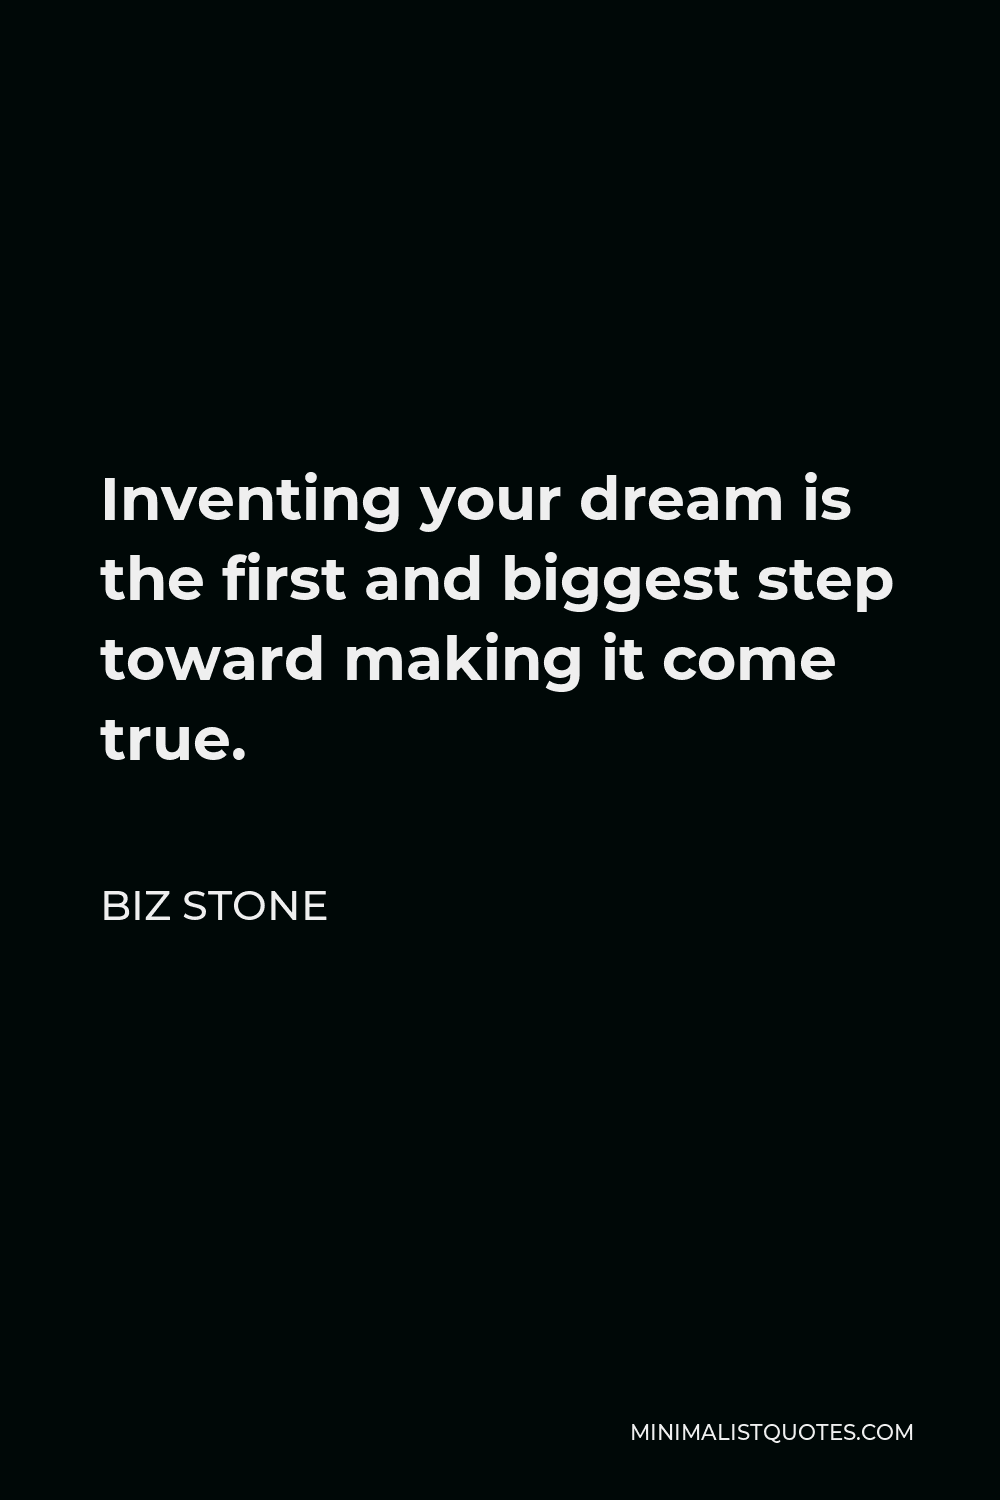 Biz Stone Quote - Inventing your dream is the first and biggest step toward making it come true.